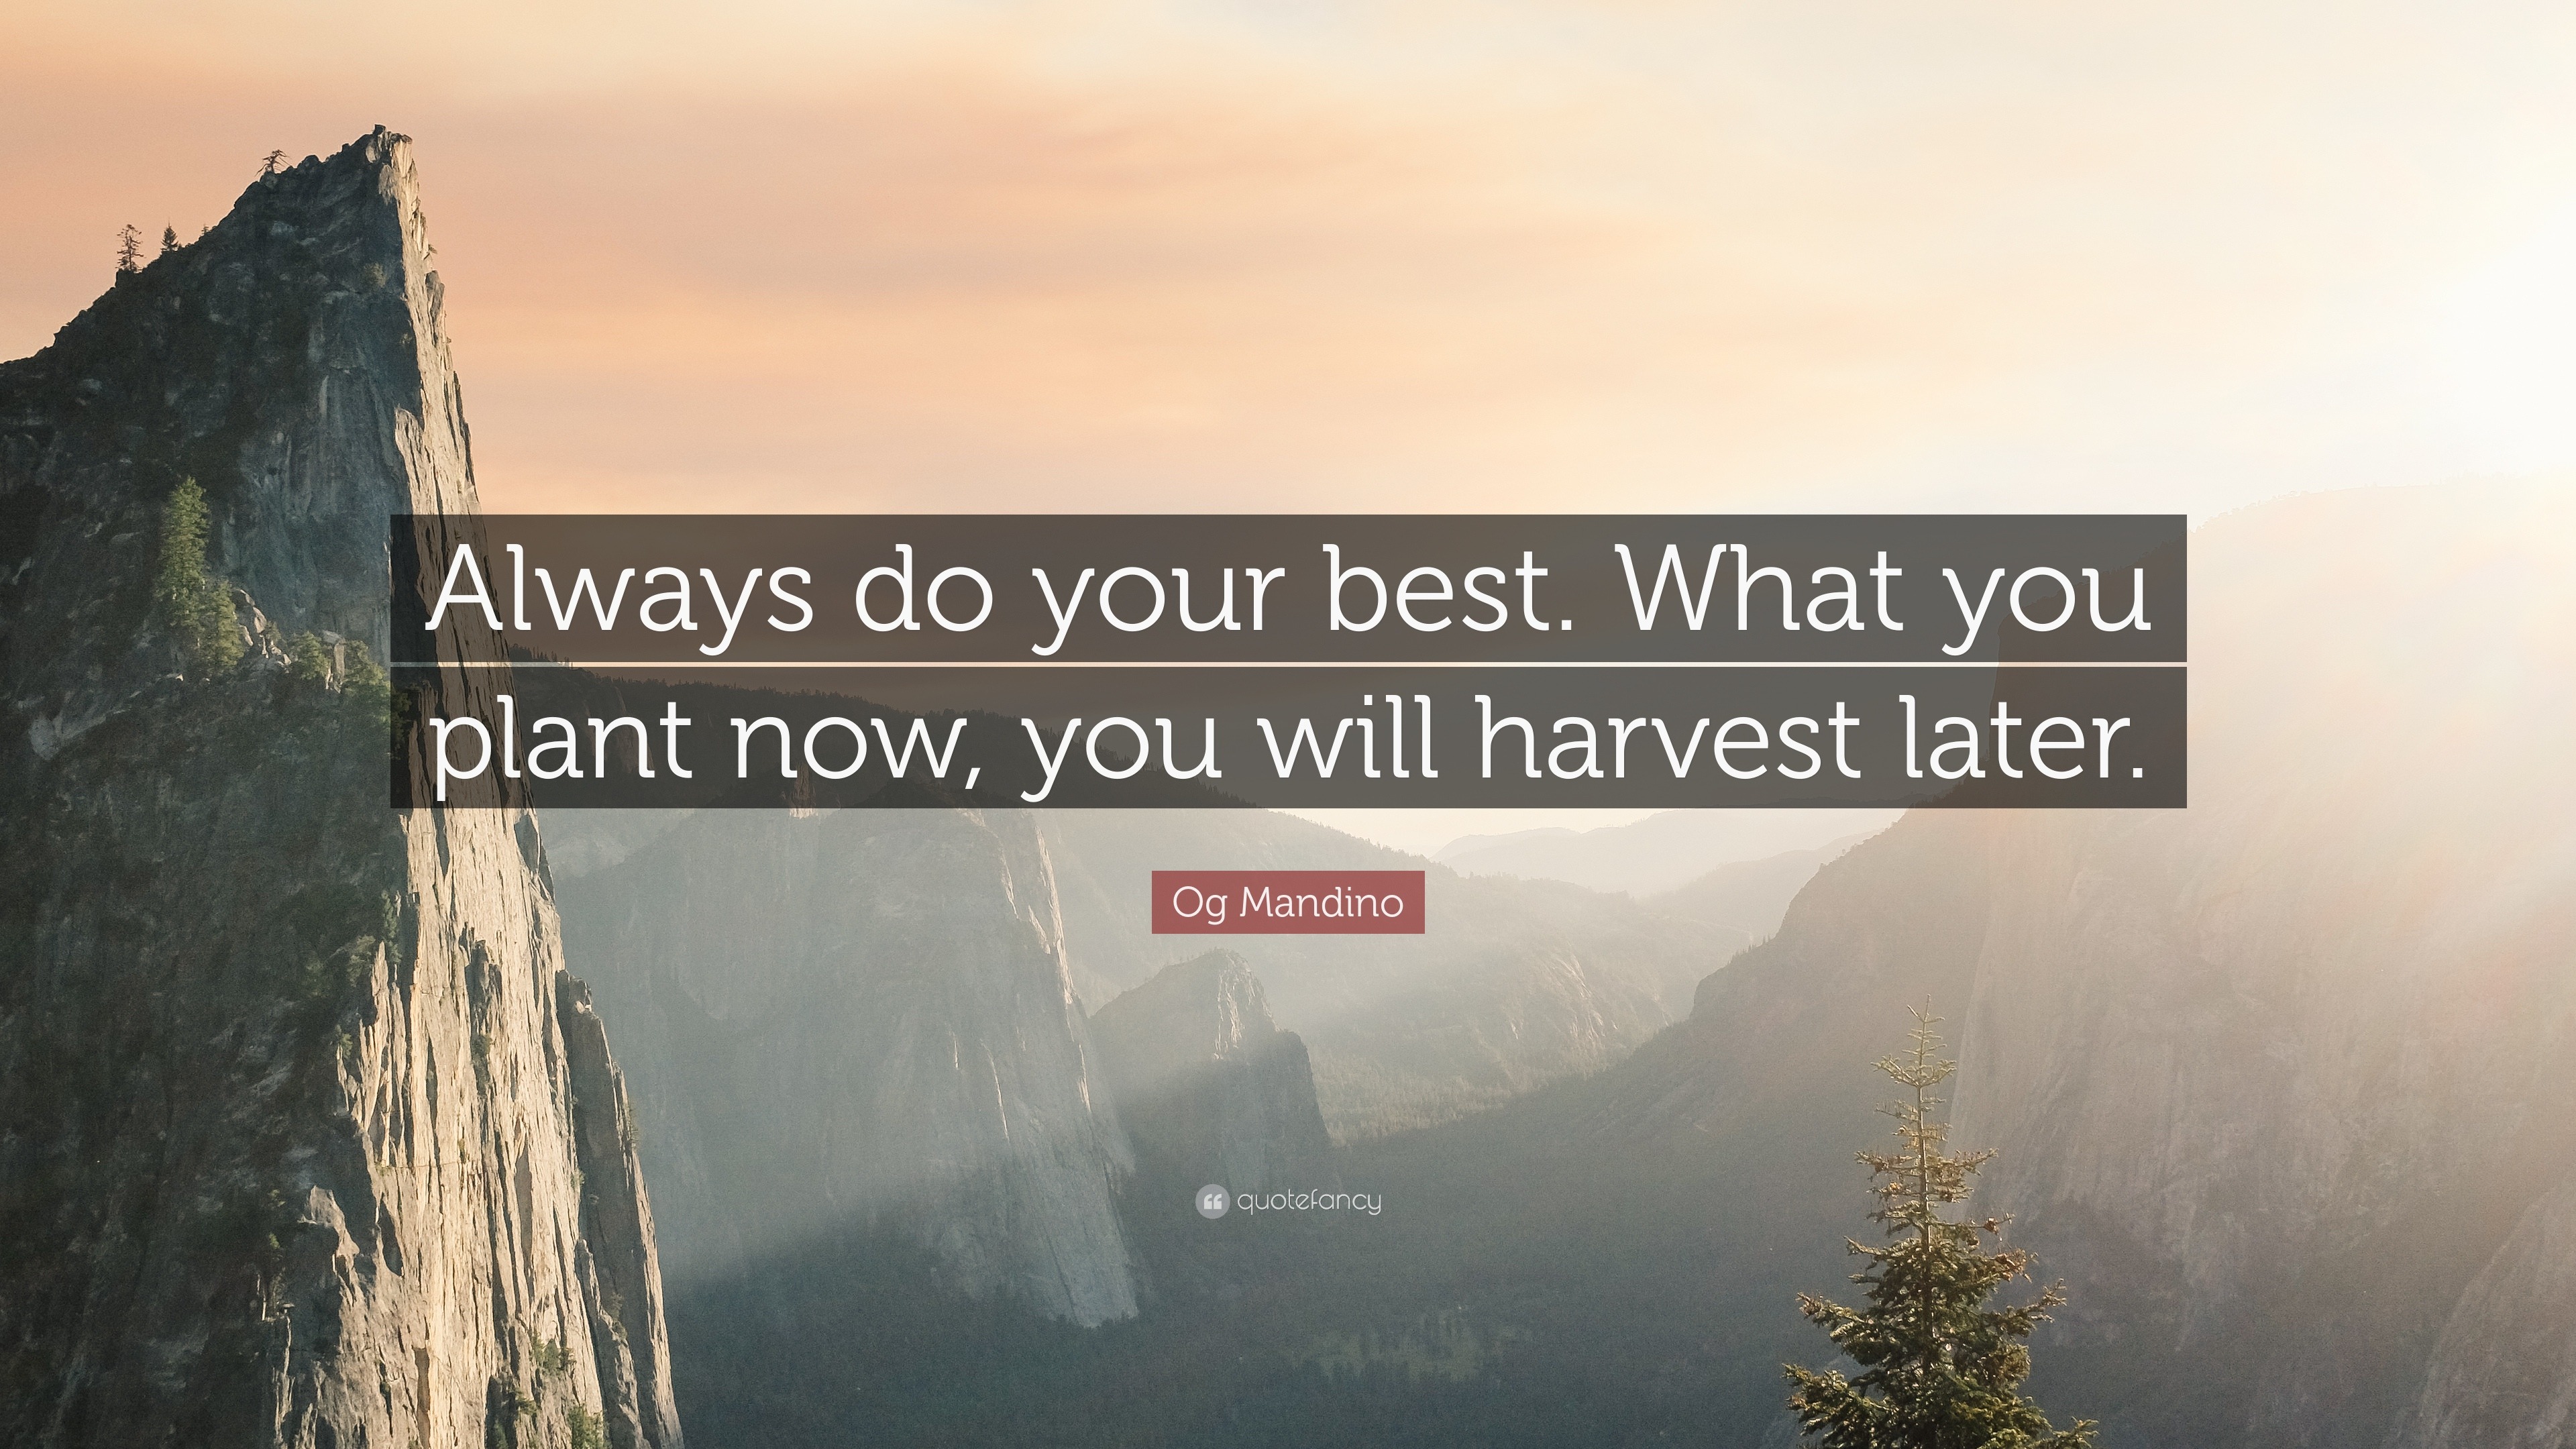 Og Mandino Quote: “Always do your best. What you plant now, you will  harvest later.”